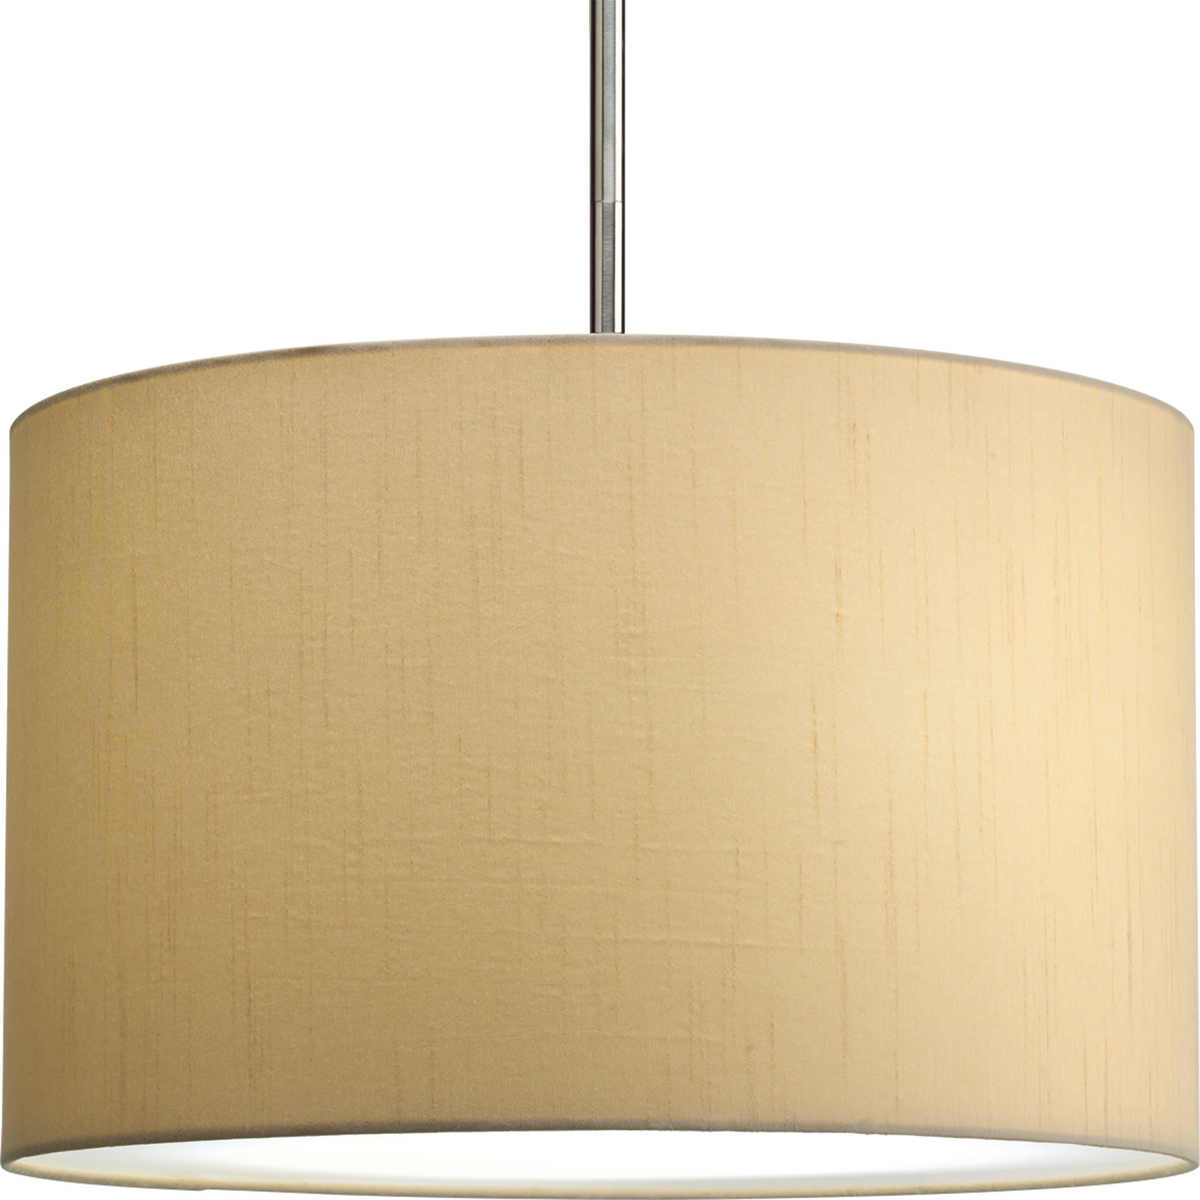 The Markor Series is a modular pendant system. The versatile series allow the choice of shades and stem kits. This 16 in shade with Beige Silken fabric is inspired by mid-century design. Acrylic bottom diffuser. This shade can be used with a variety of stem kits from 1 to 3 light in CFL, LED and incandescent light sources.